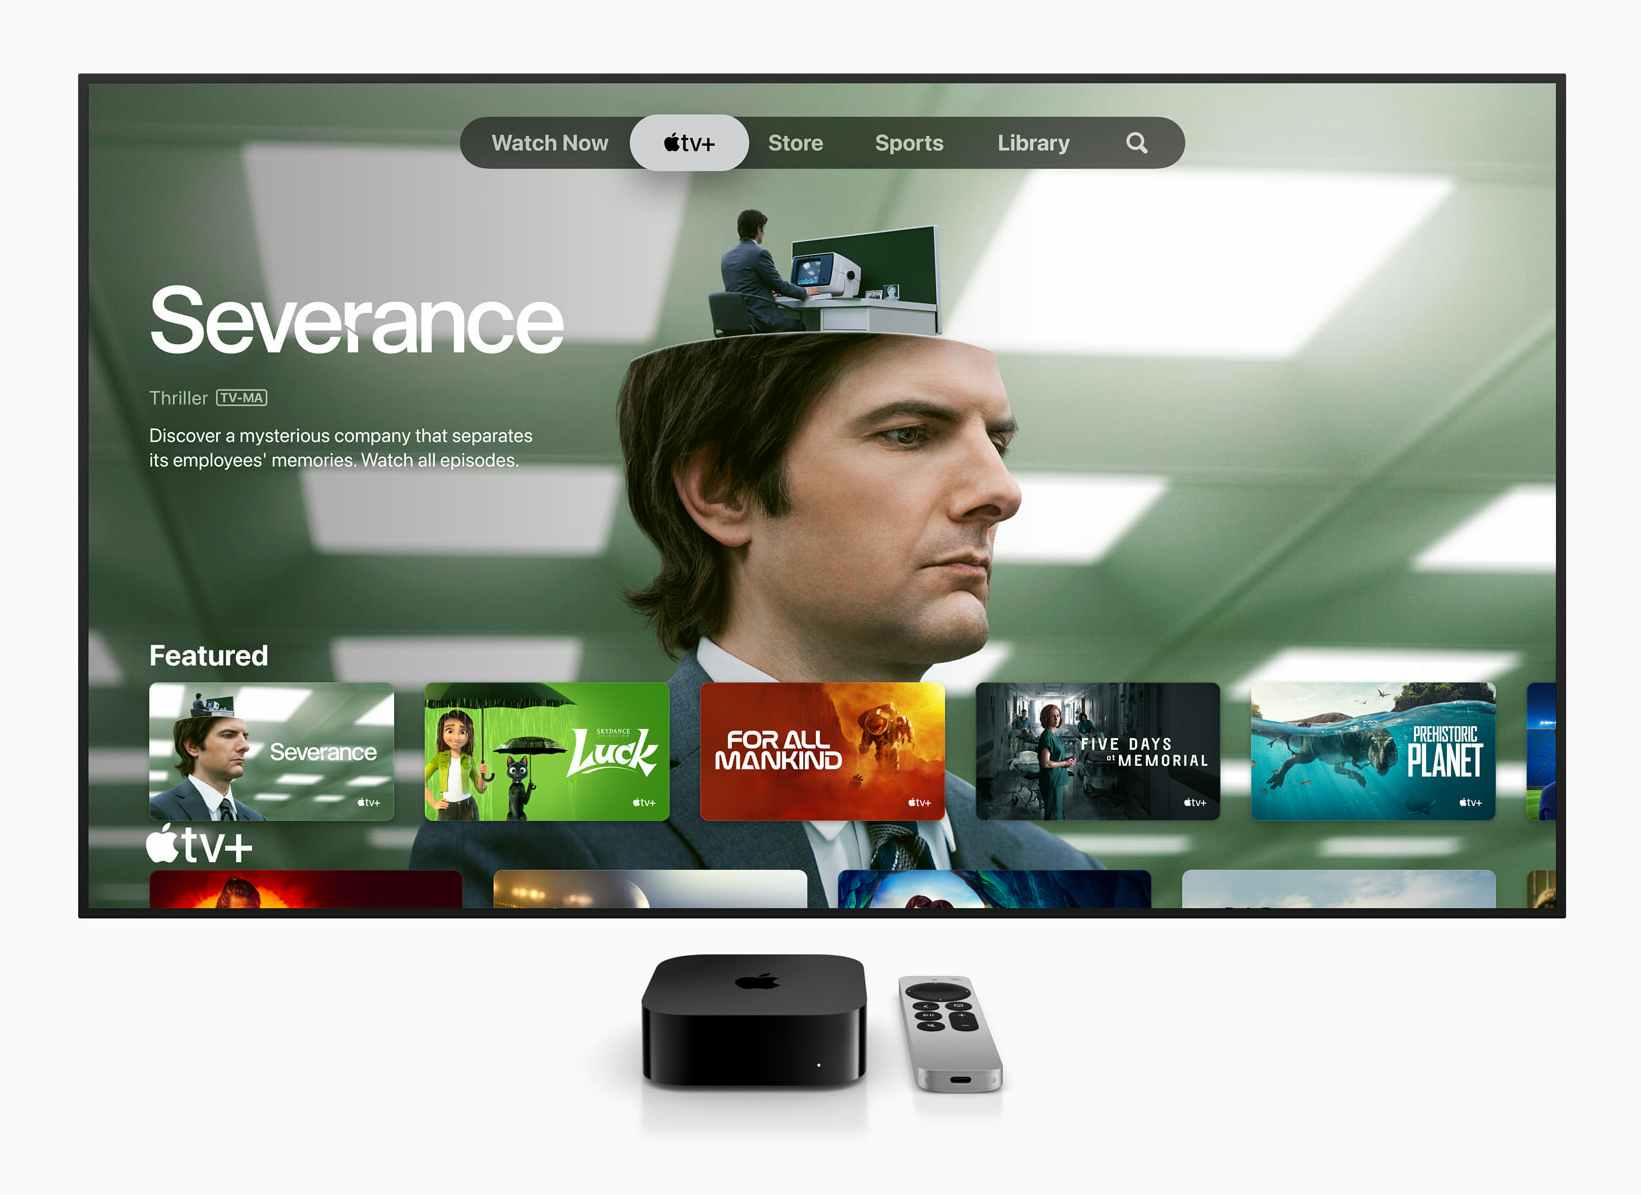 Does the Apple TV do enough to warrant its premium price? - 9to5Mac